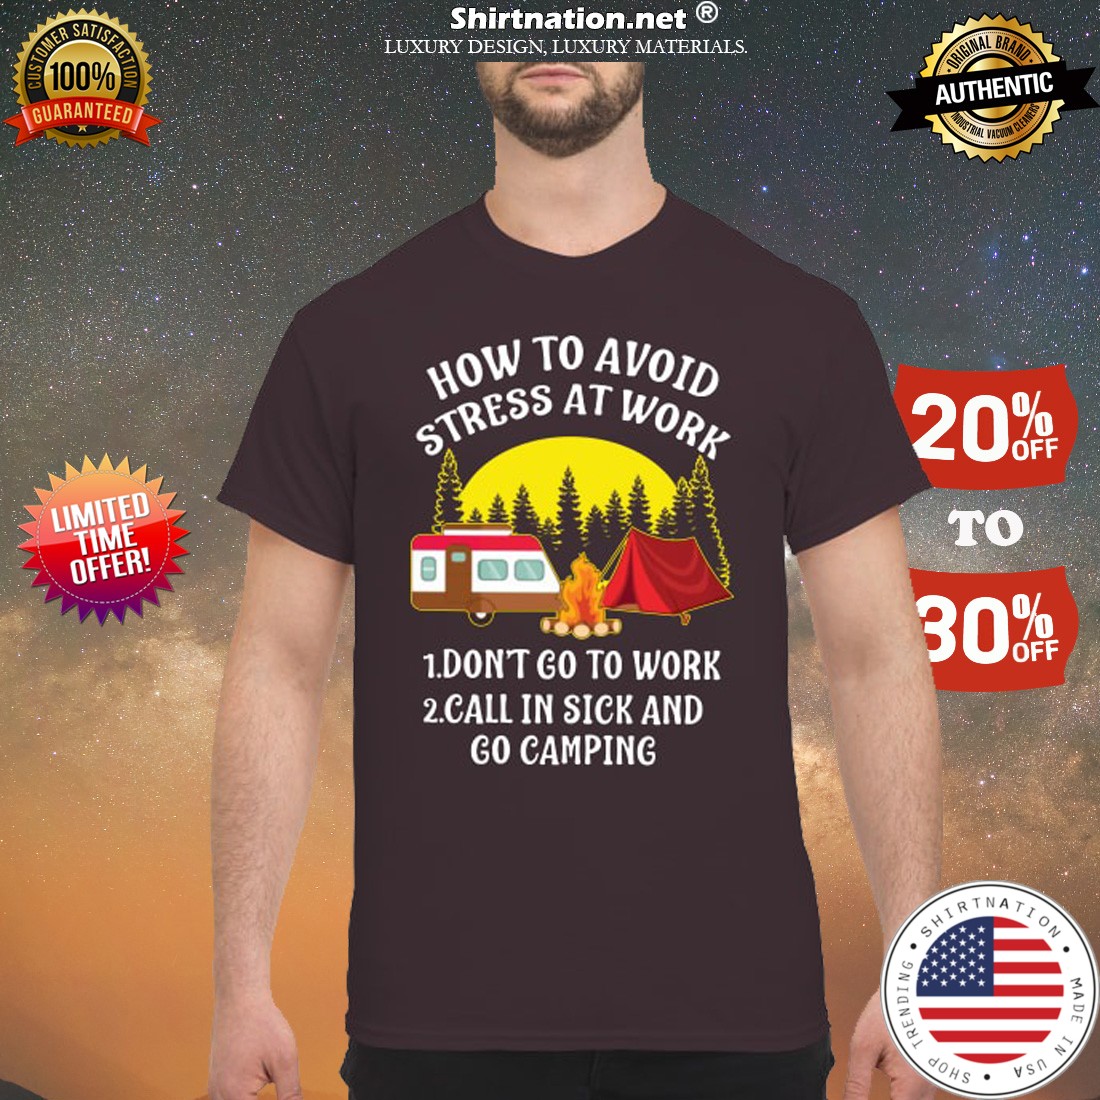 How to avoid stress at work don't go to work call in sick and go camping shirt